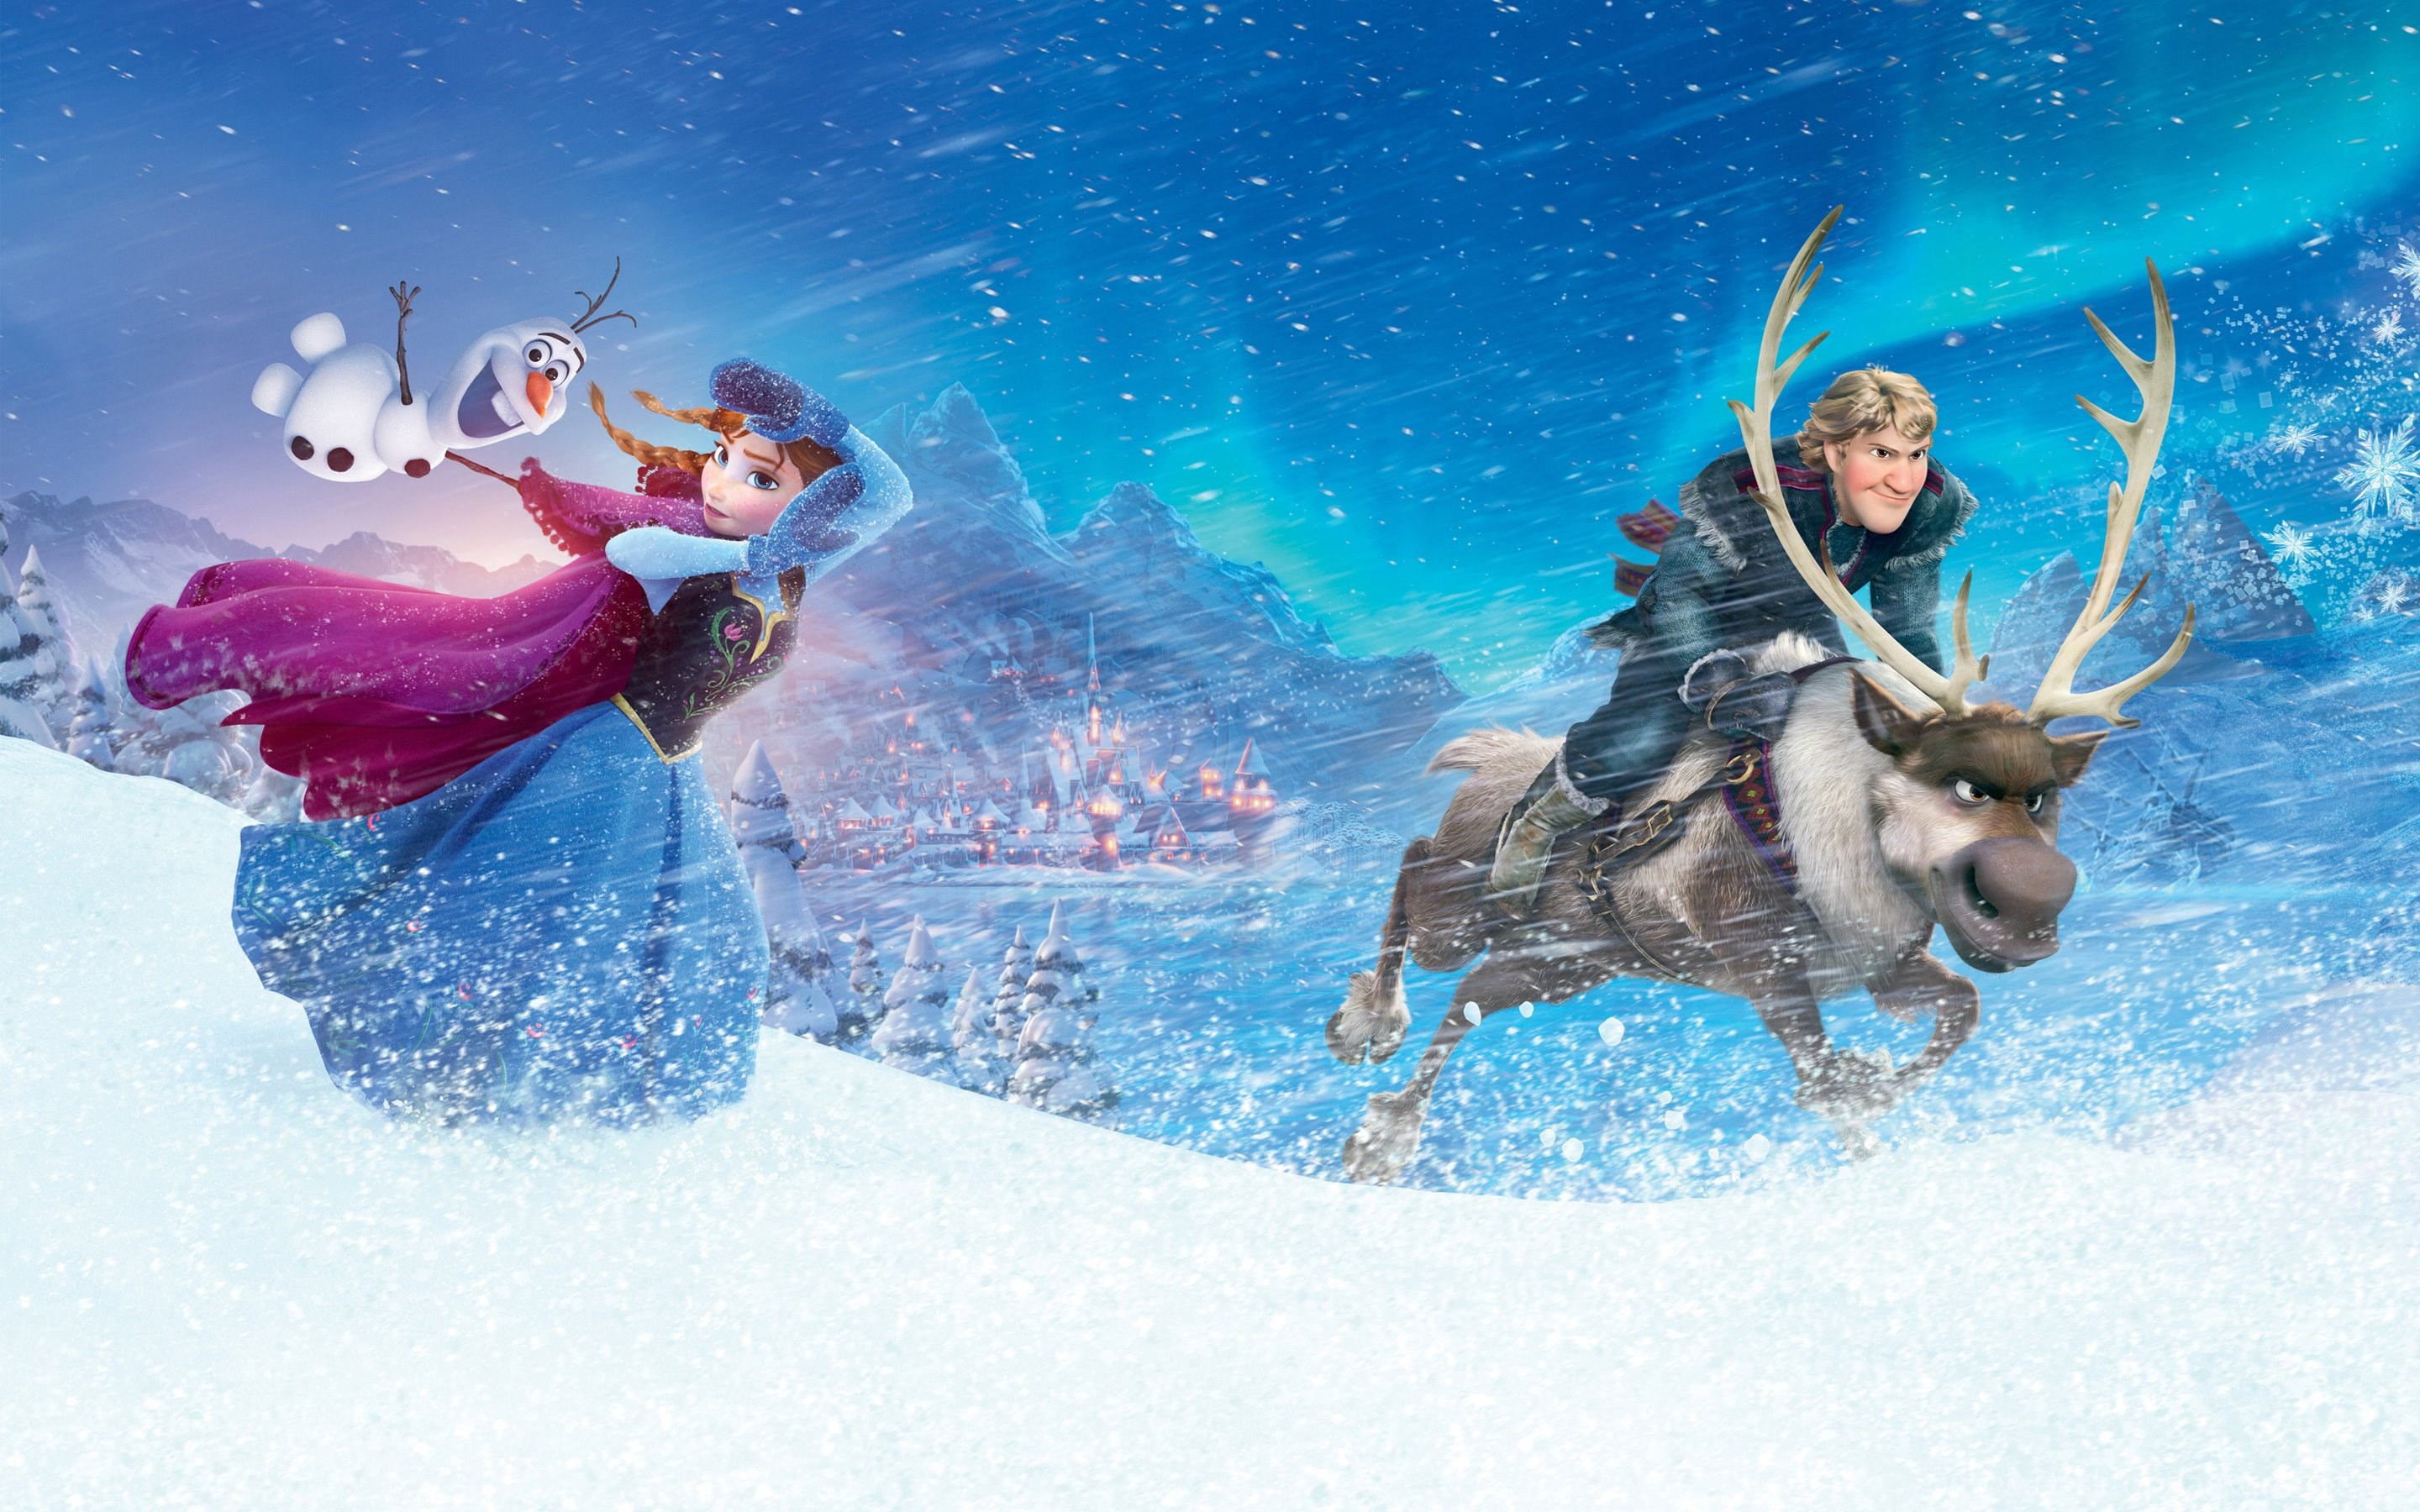 Wallpapers Anna Kristoff In Frozen Hd Wallpapers Desktop Background Images, Photos, Reviews